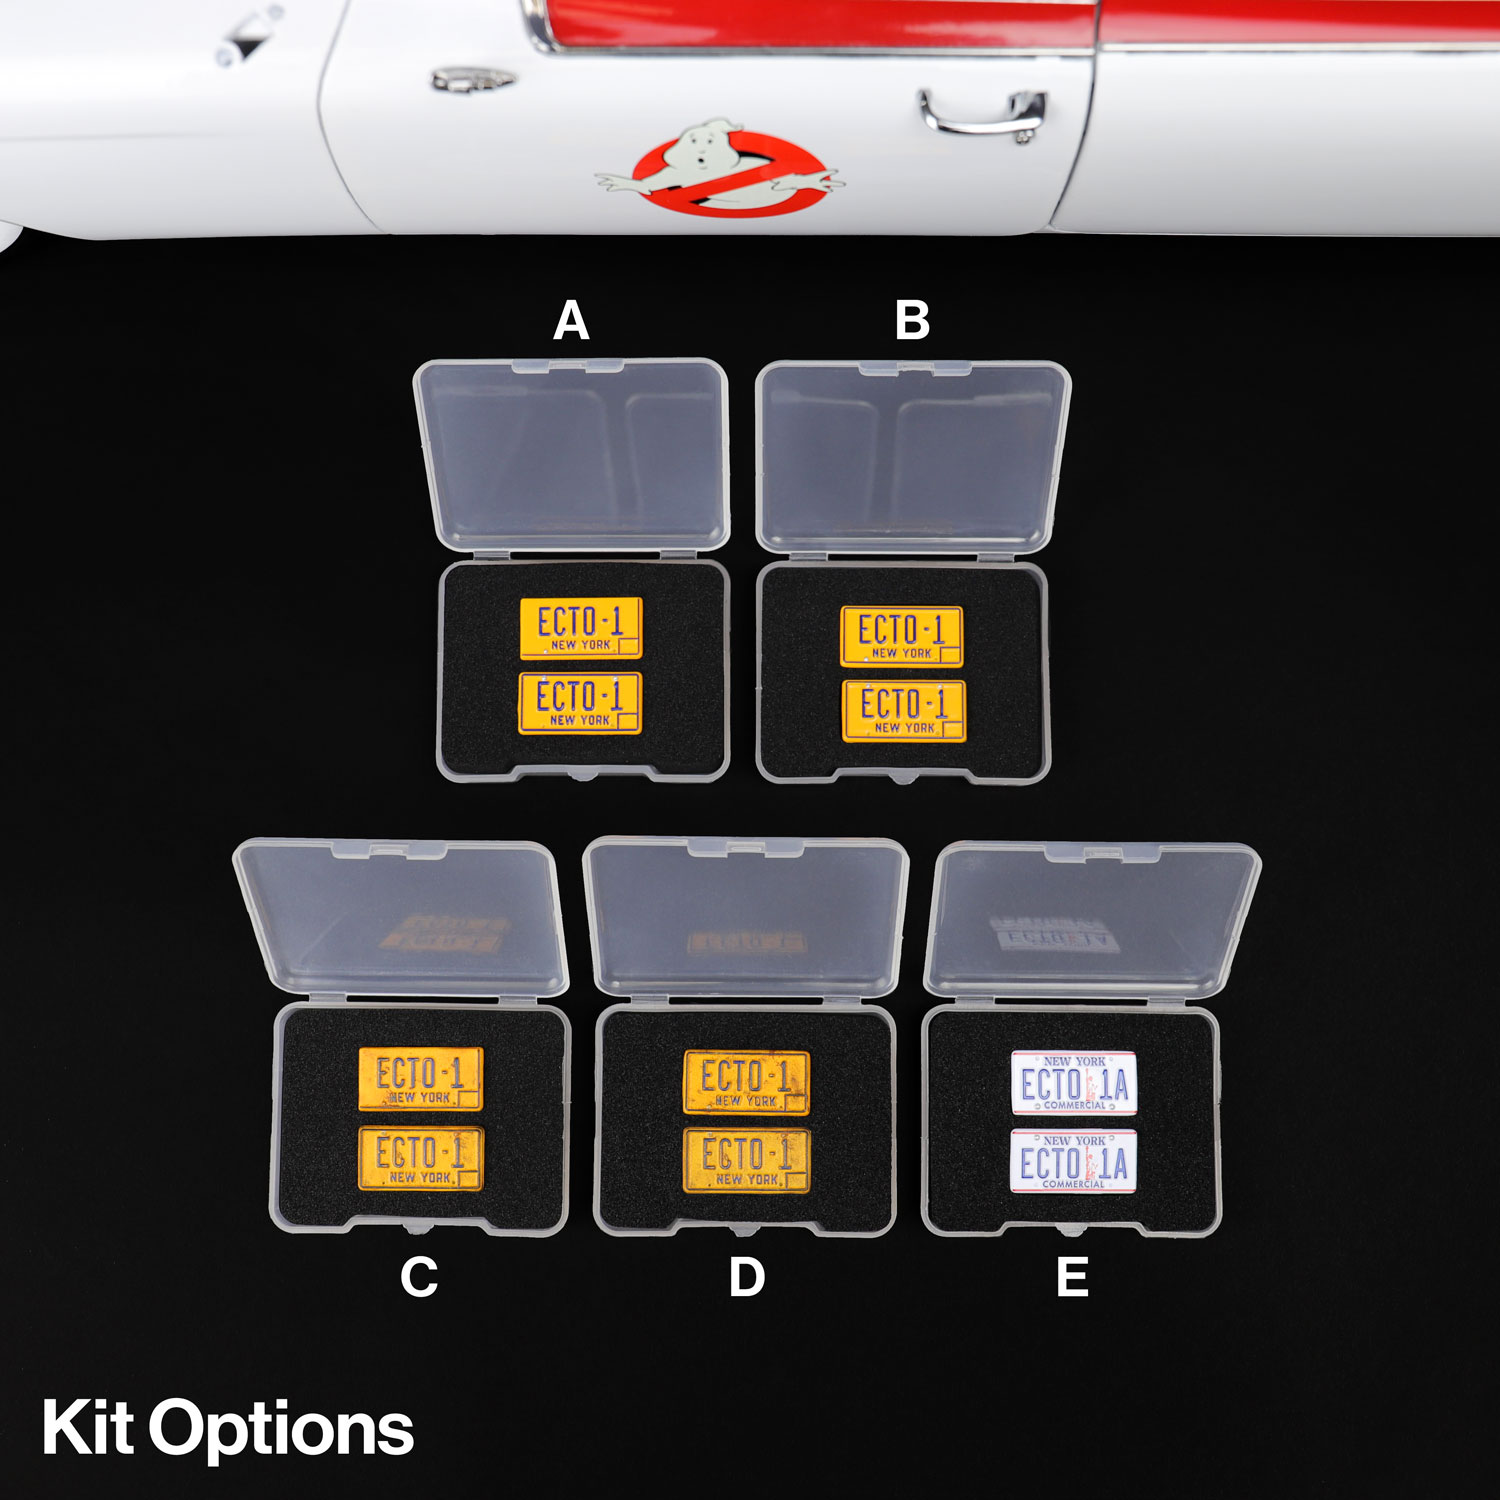 Kit options for Magnetic Die-cast Licence Plates for Ecto-1